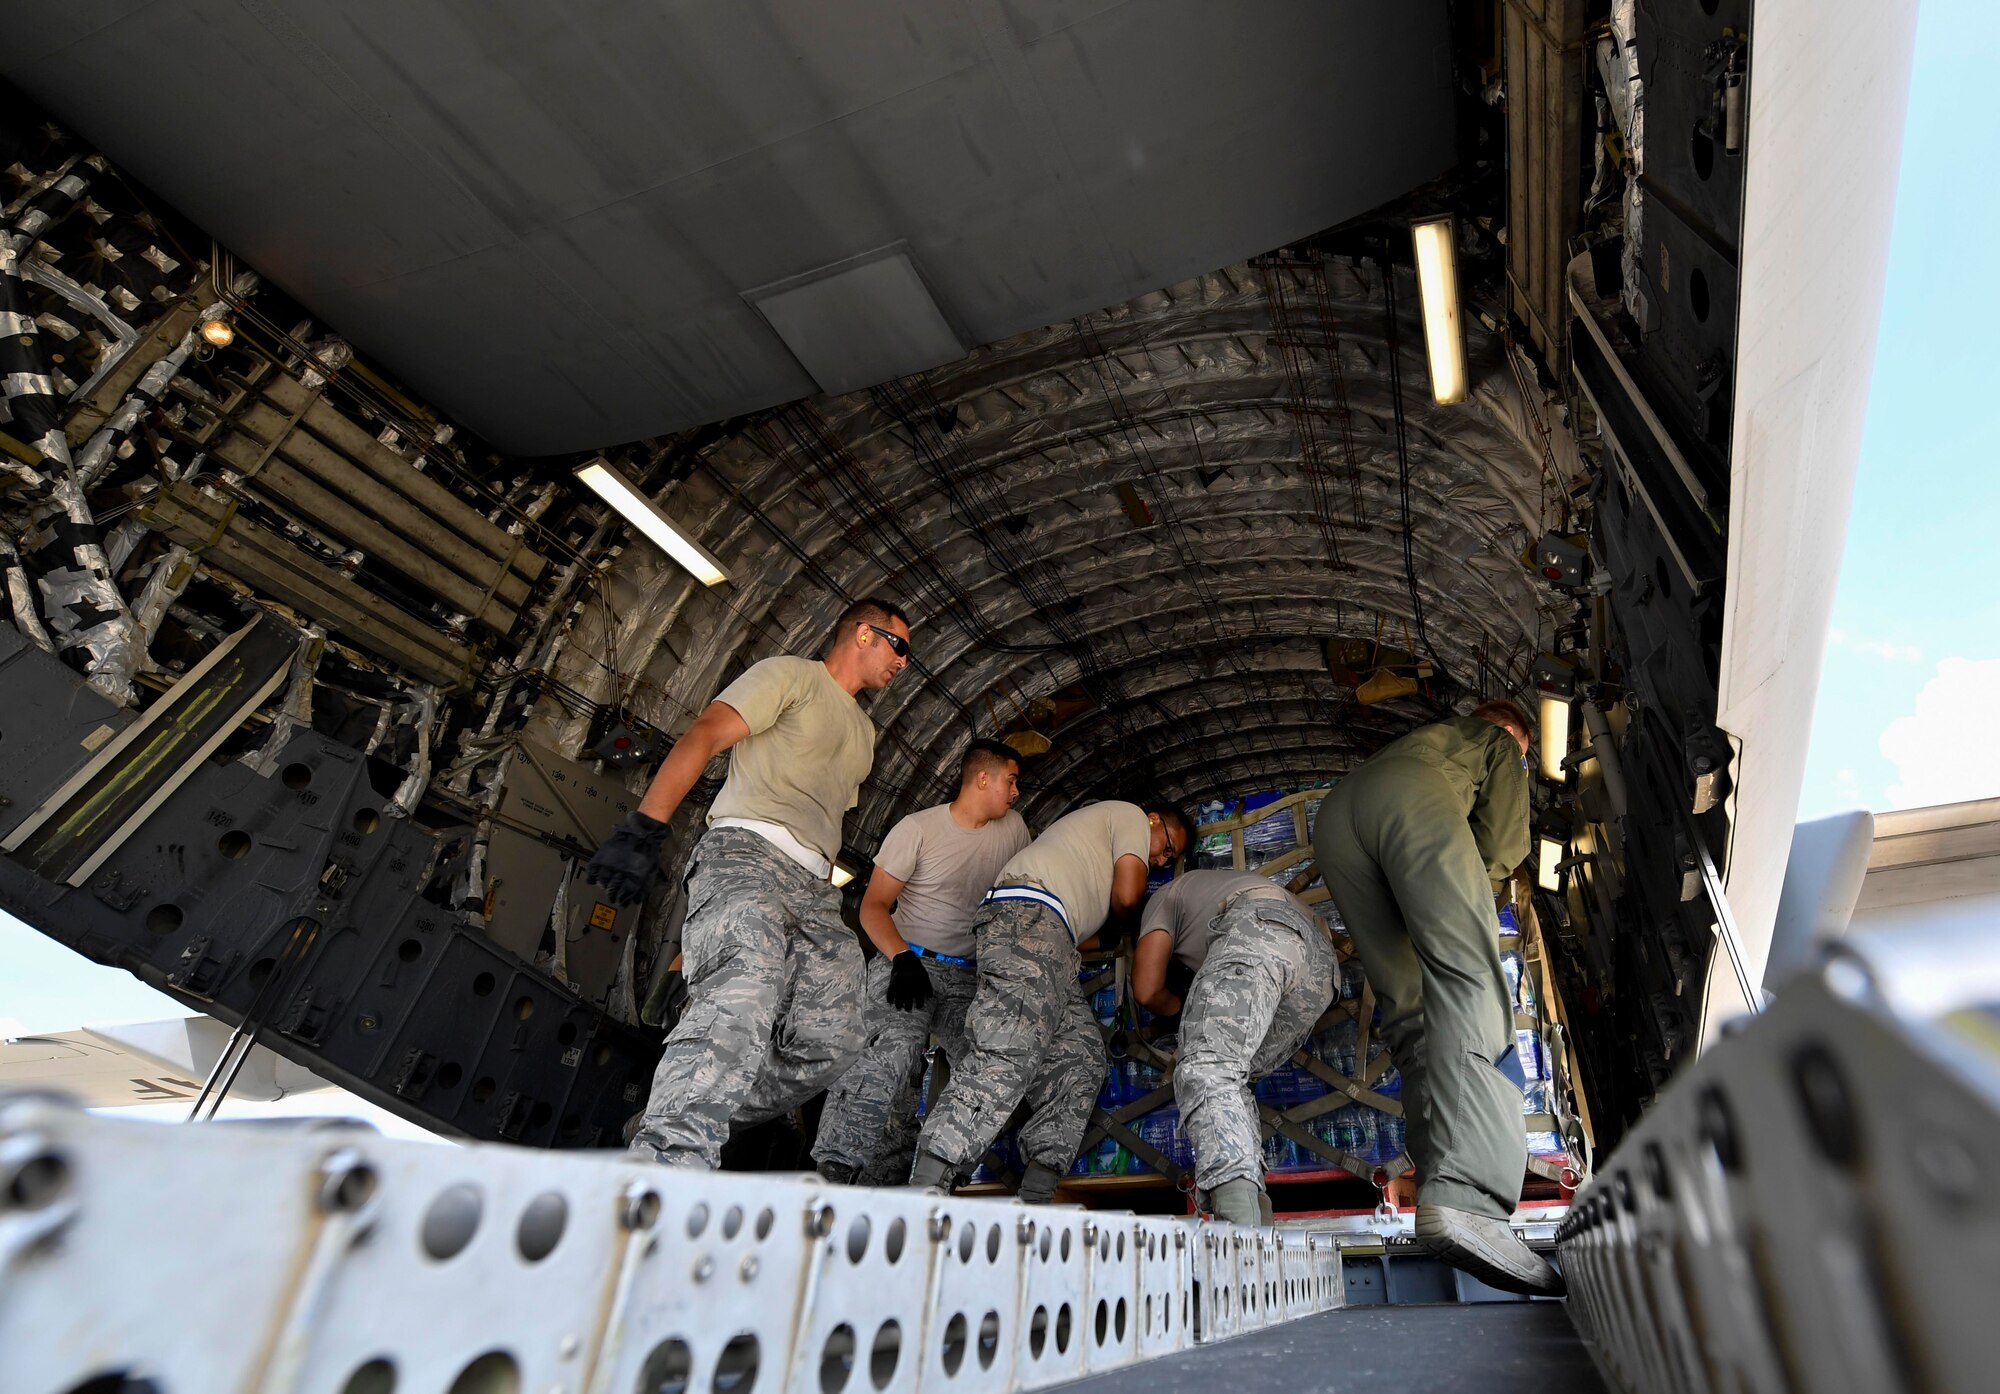 Airmen from the 502nd Logistics Readiness Squadron, from Joint Base San Antonio-Randolph, load cargo onto a C-17 Globemaster III at Kelly Field in San Antonio, Texas, Sept. 24, 2017. Members of the 14th Airlift Squadron, 437th Airlift Wing, delivered more than 129,000 pounds of food and water to St. Croix, Virgin Islands in support of relief efforts after Hurricane Maria. The mission to St. Croix marked the second mission the crew flew to the Virgin Islands for humanitarian aid in 48 hours.